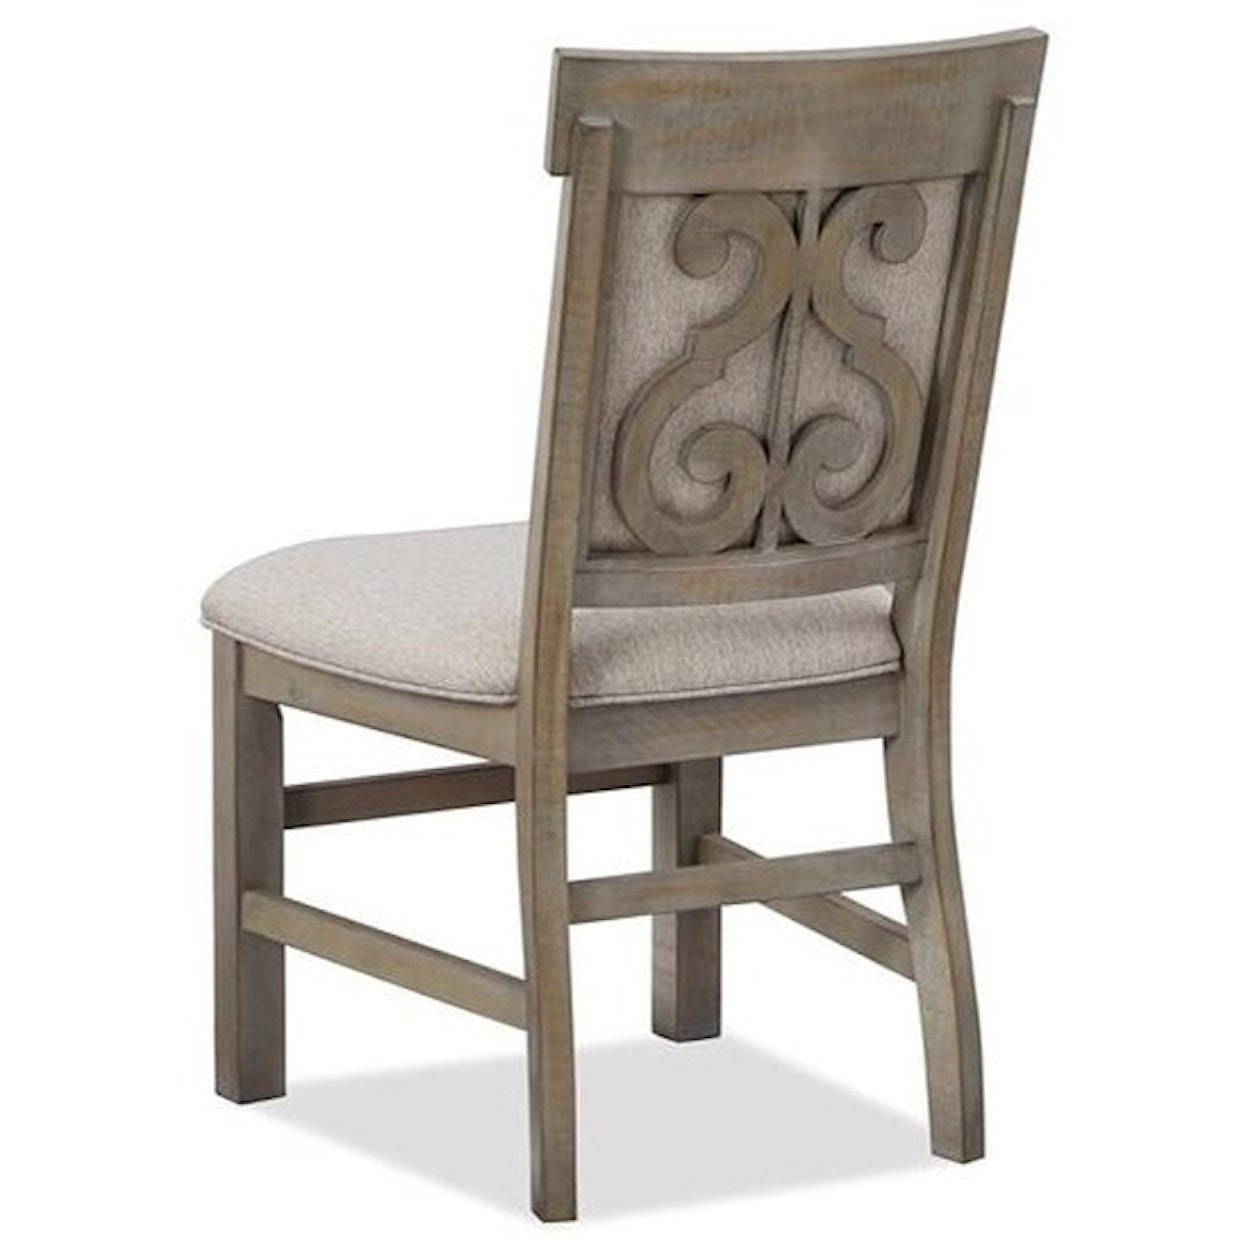 Magnussen Home Tinley Park Dining Dining Side Chair w/Upholstered Seat & Back